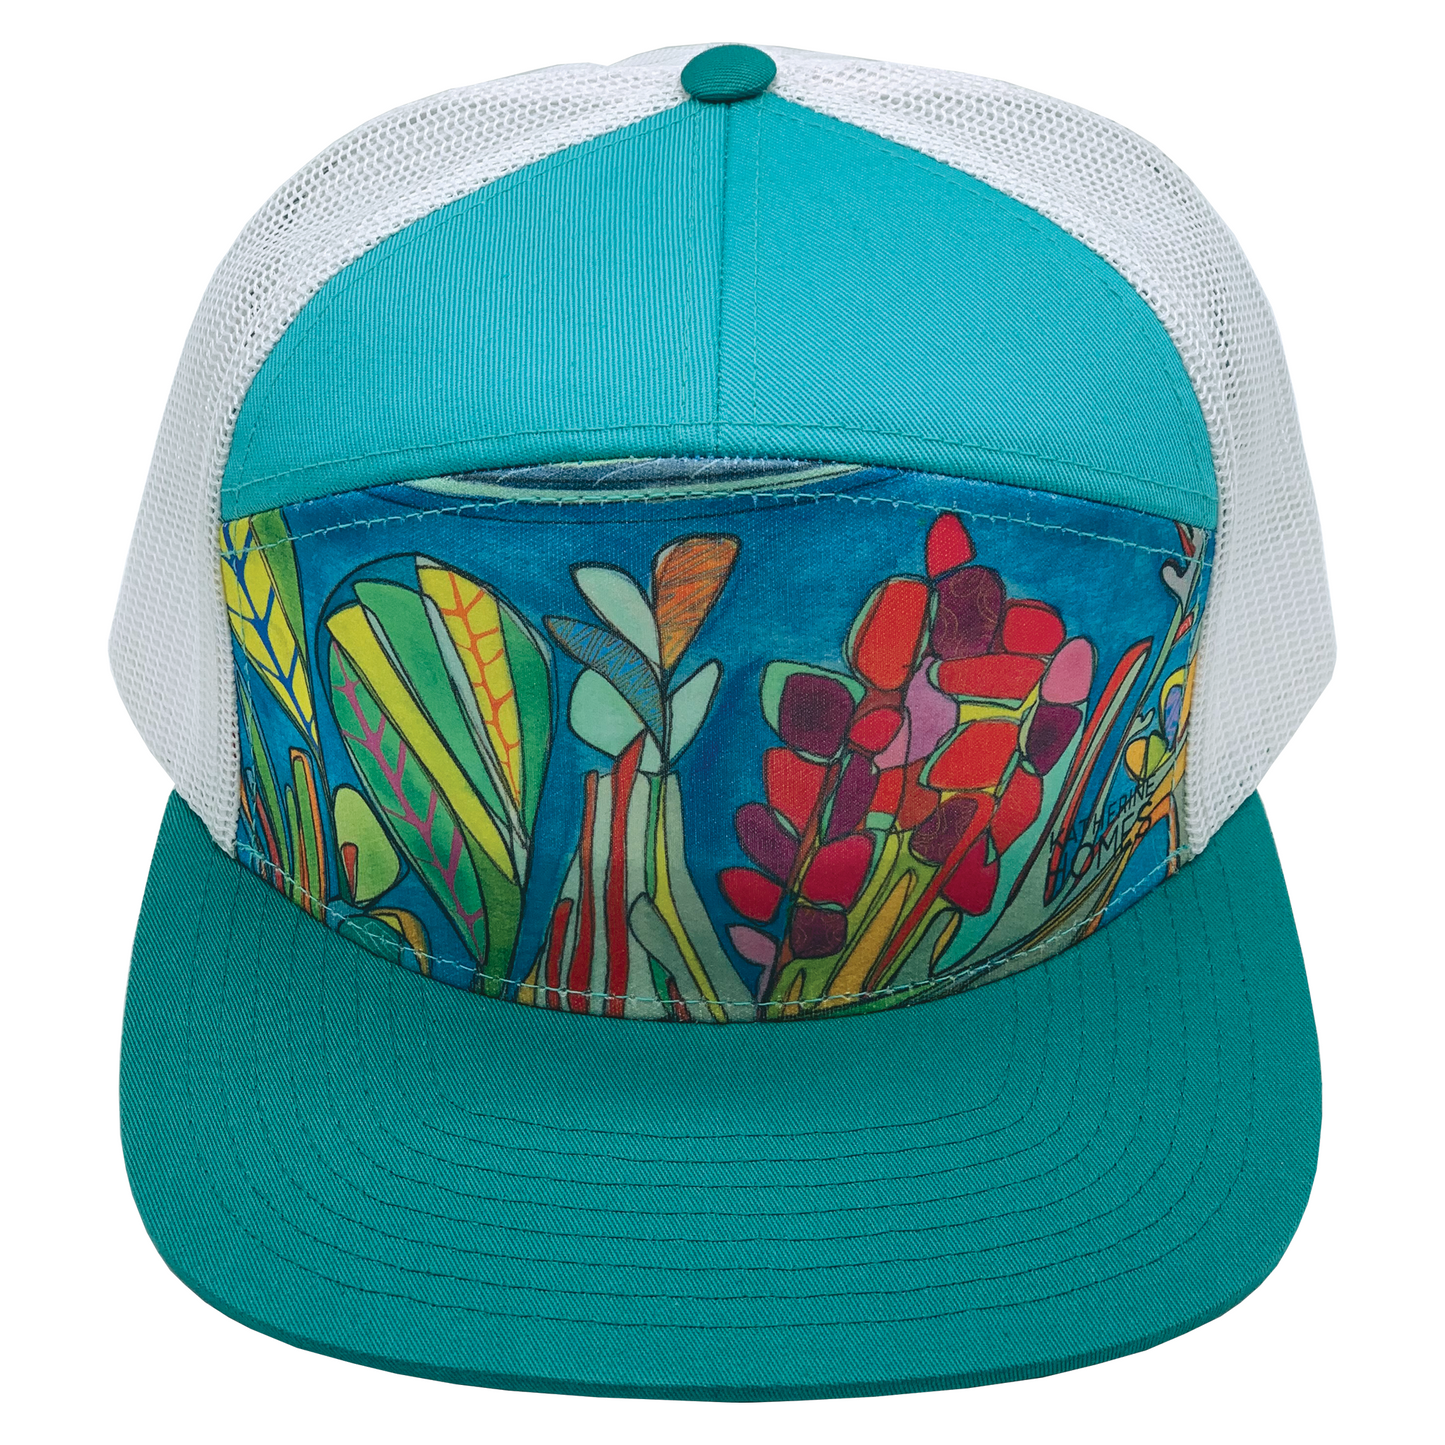 Coral Reef | 7 Panel Hat | Teal | Aqua | White 100% Recycled Mesh